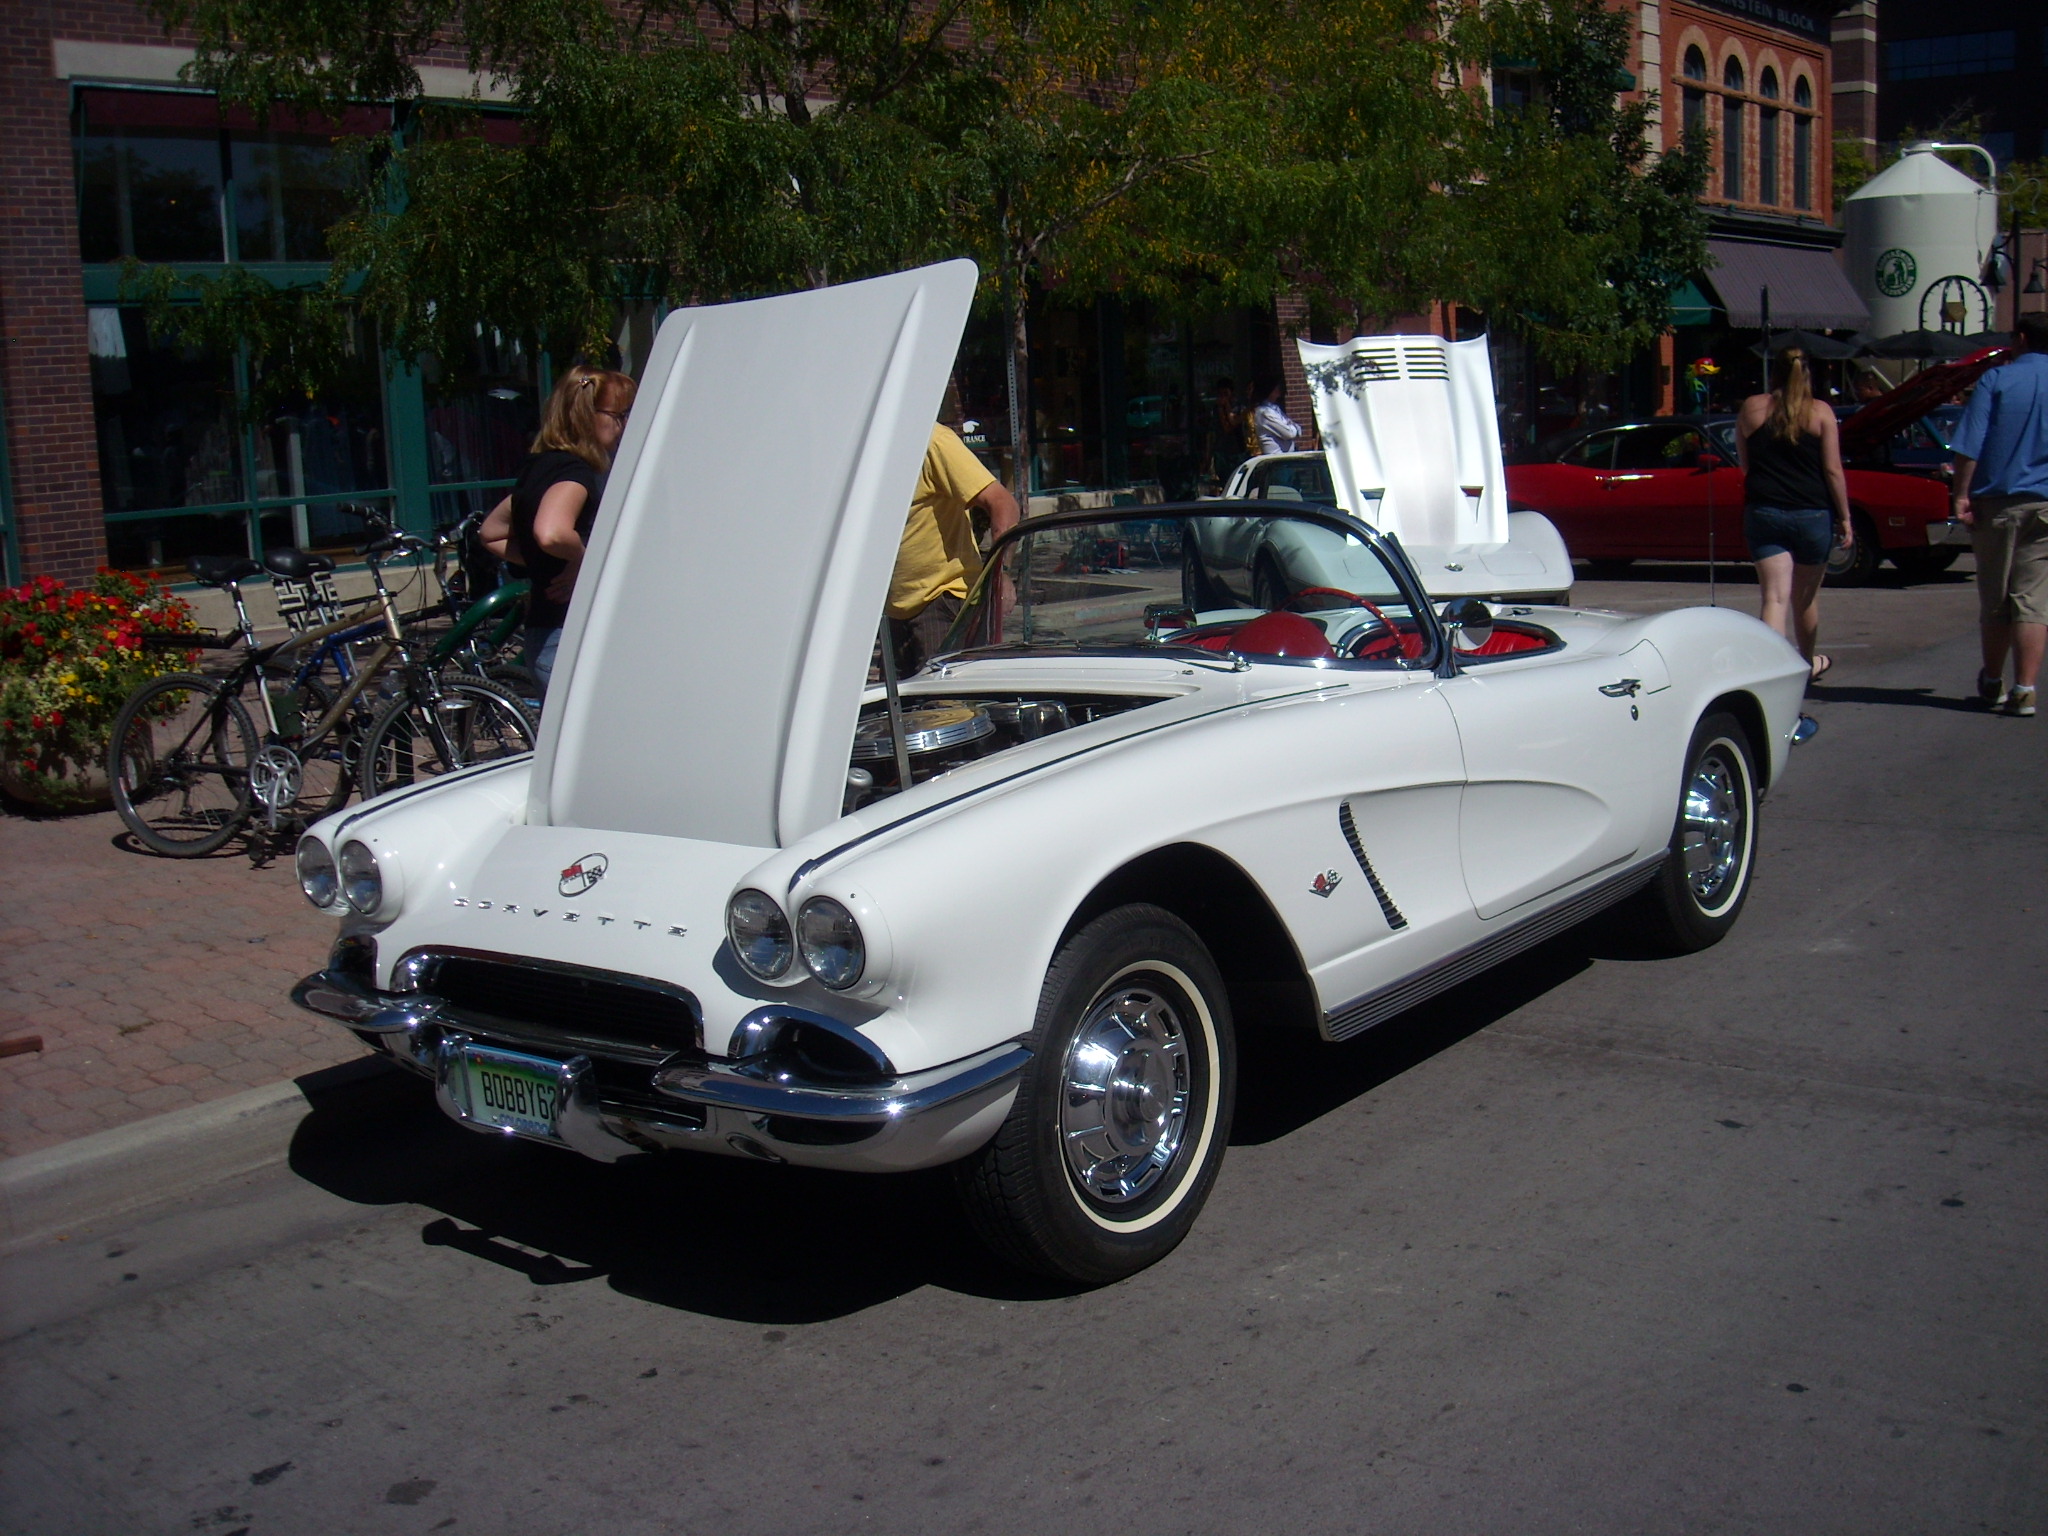 My favorite car of the show: a 50s Corvette.